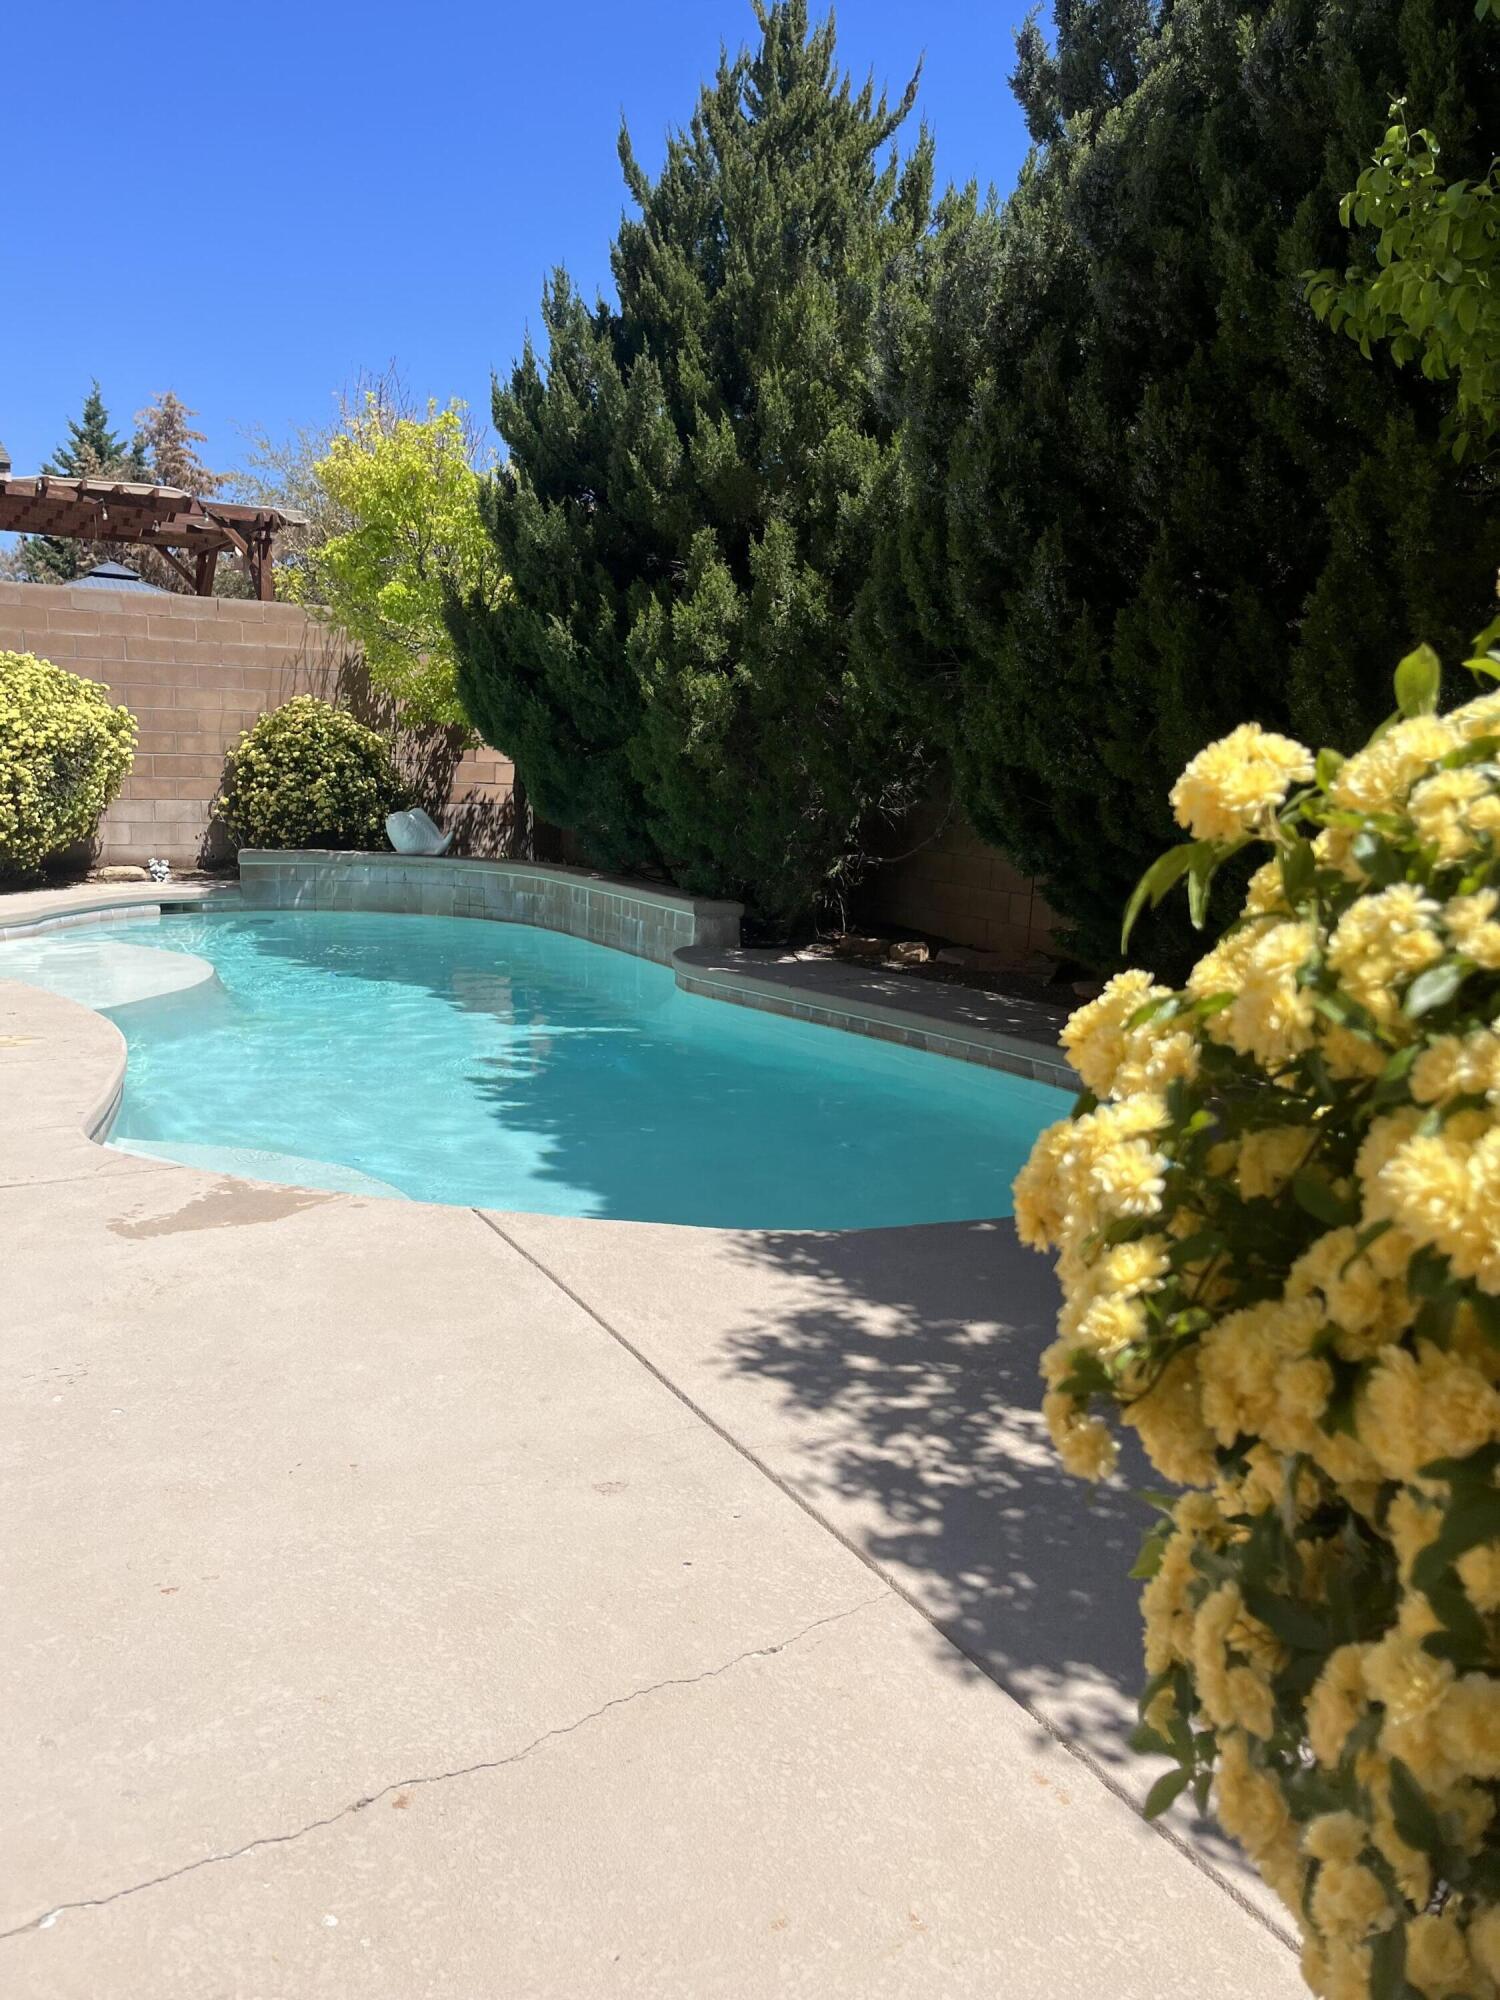 1722 Agua Dulce Drive SE, Rio Rancho, New Mexico 87124, 5 Bedrooms Bedrooms, ,3 BathroomsBathrooms,Residential,For Sale,1722 Agua Dulce Drive SE,1061214